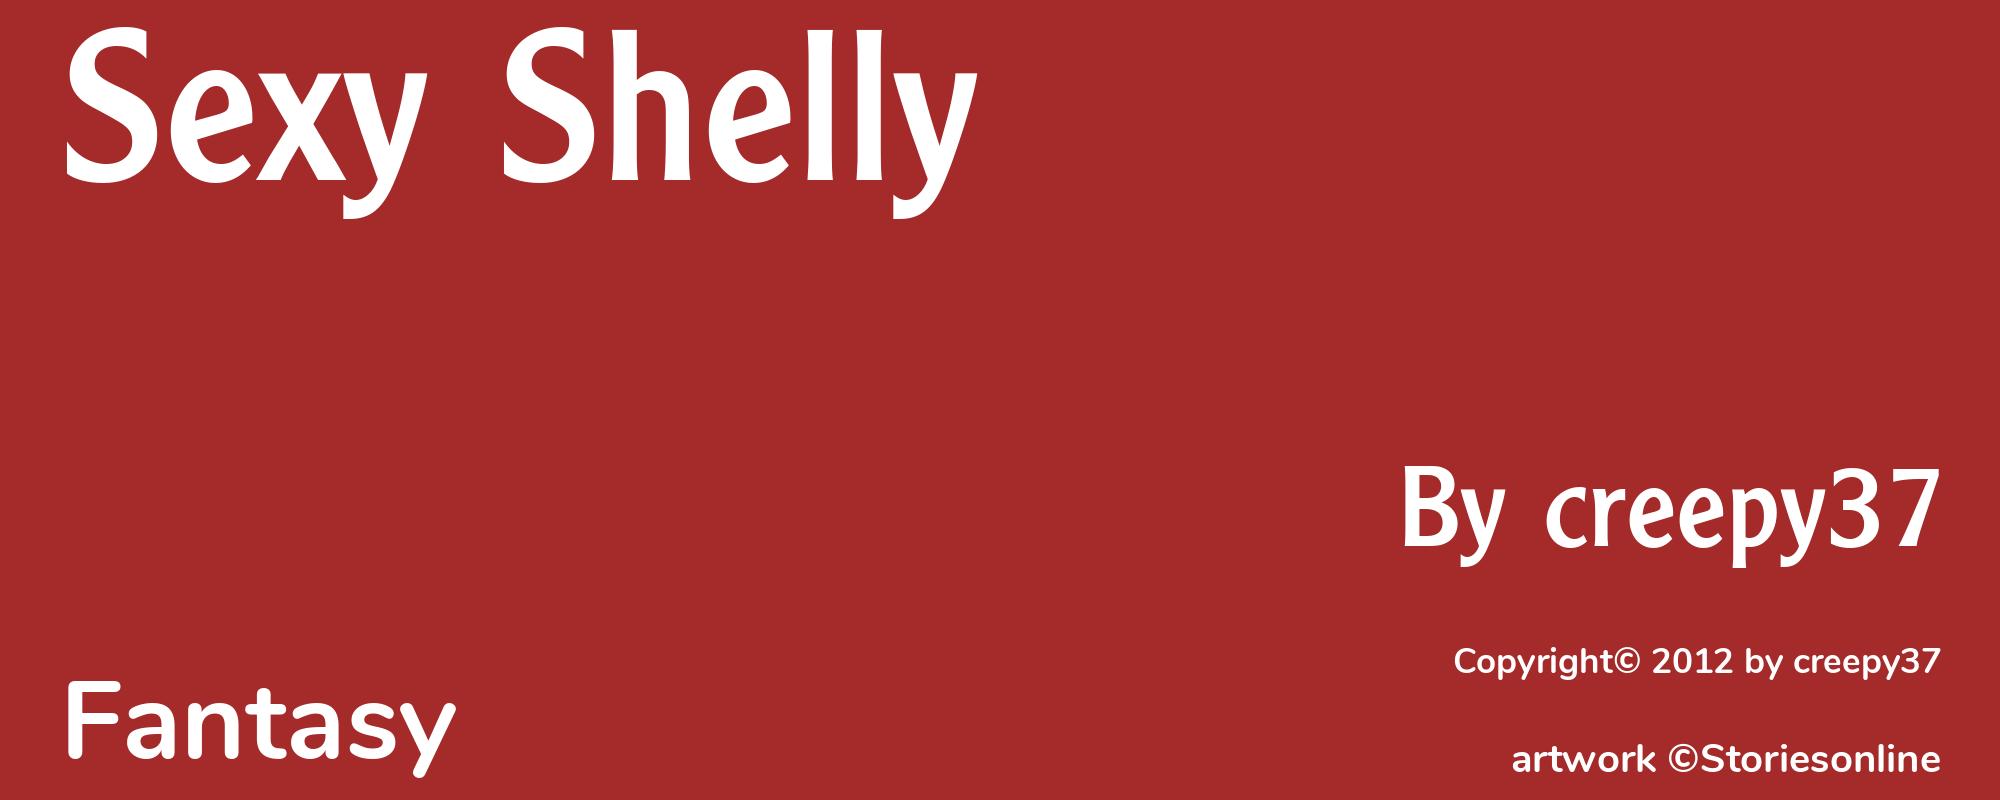 Sexy Shelly - Cover